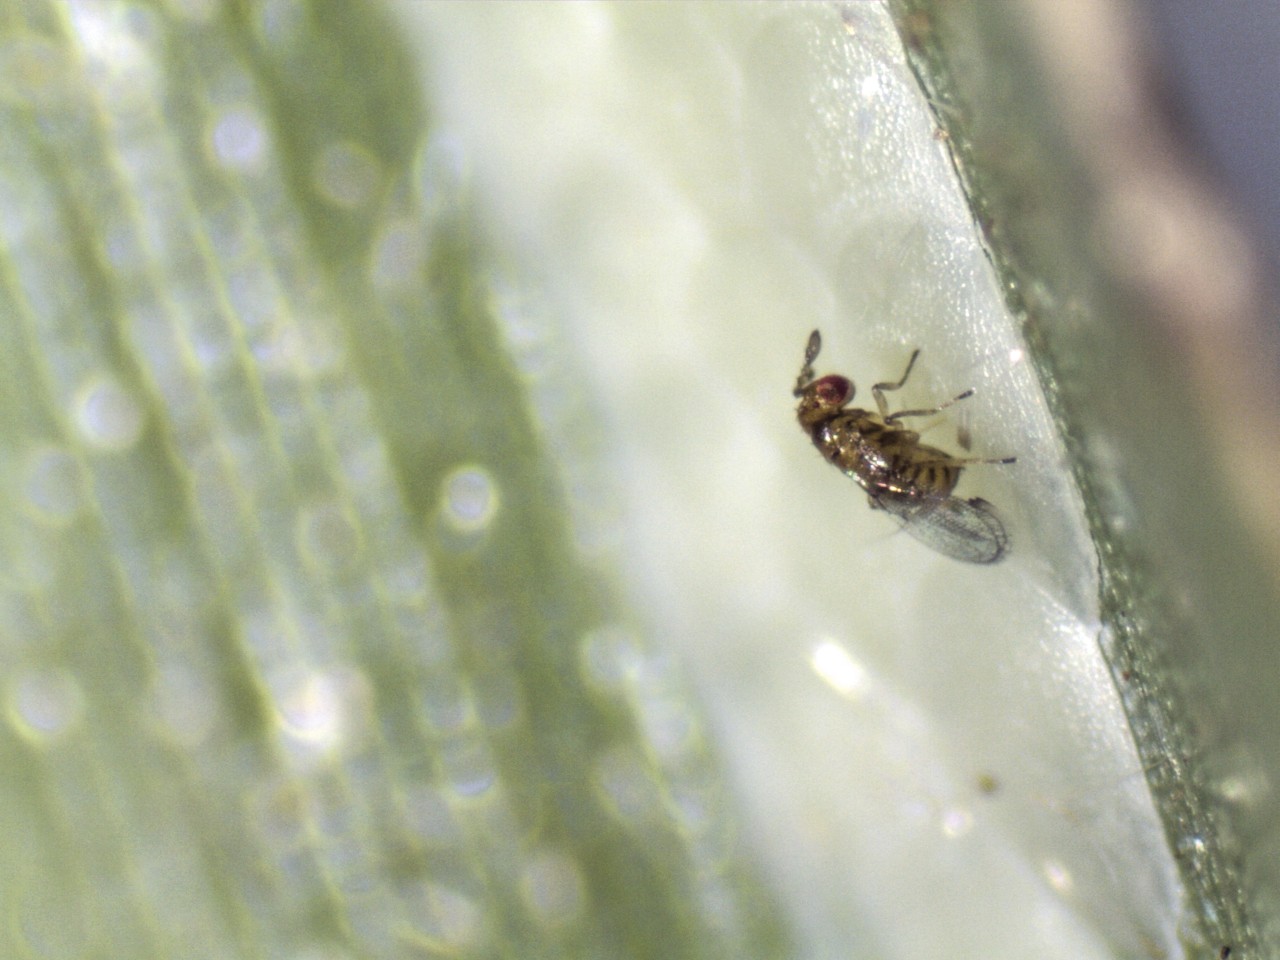 Registration of biological pest control products exceeds that of agrochemicals in Brazil